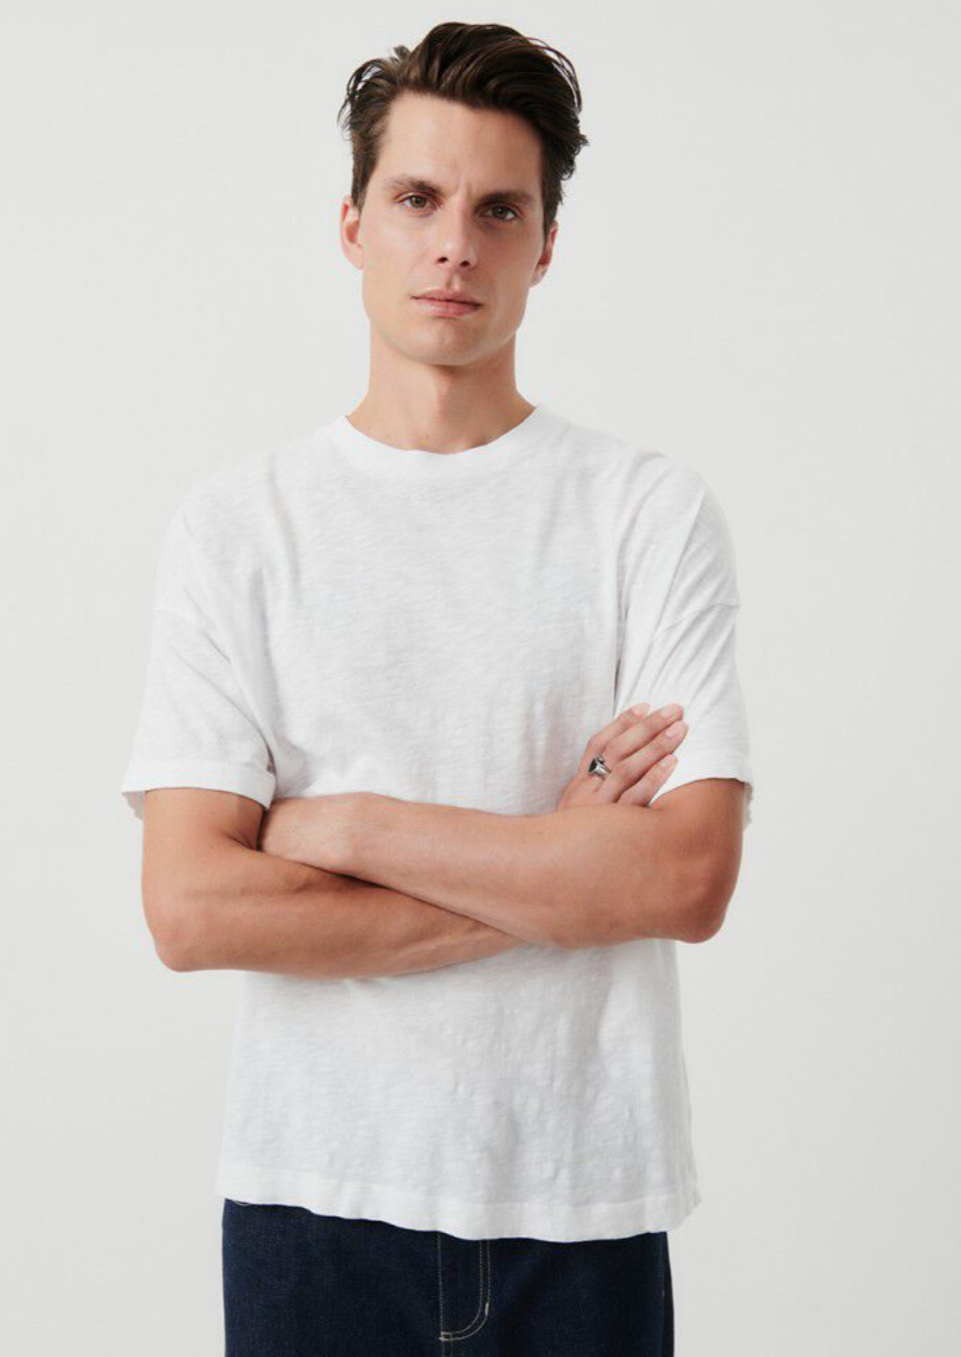 A medium close up headshot image of a male model wearing the Bysapick T-Shirt in white styled with dark denim